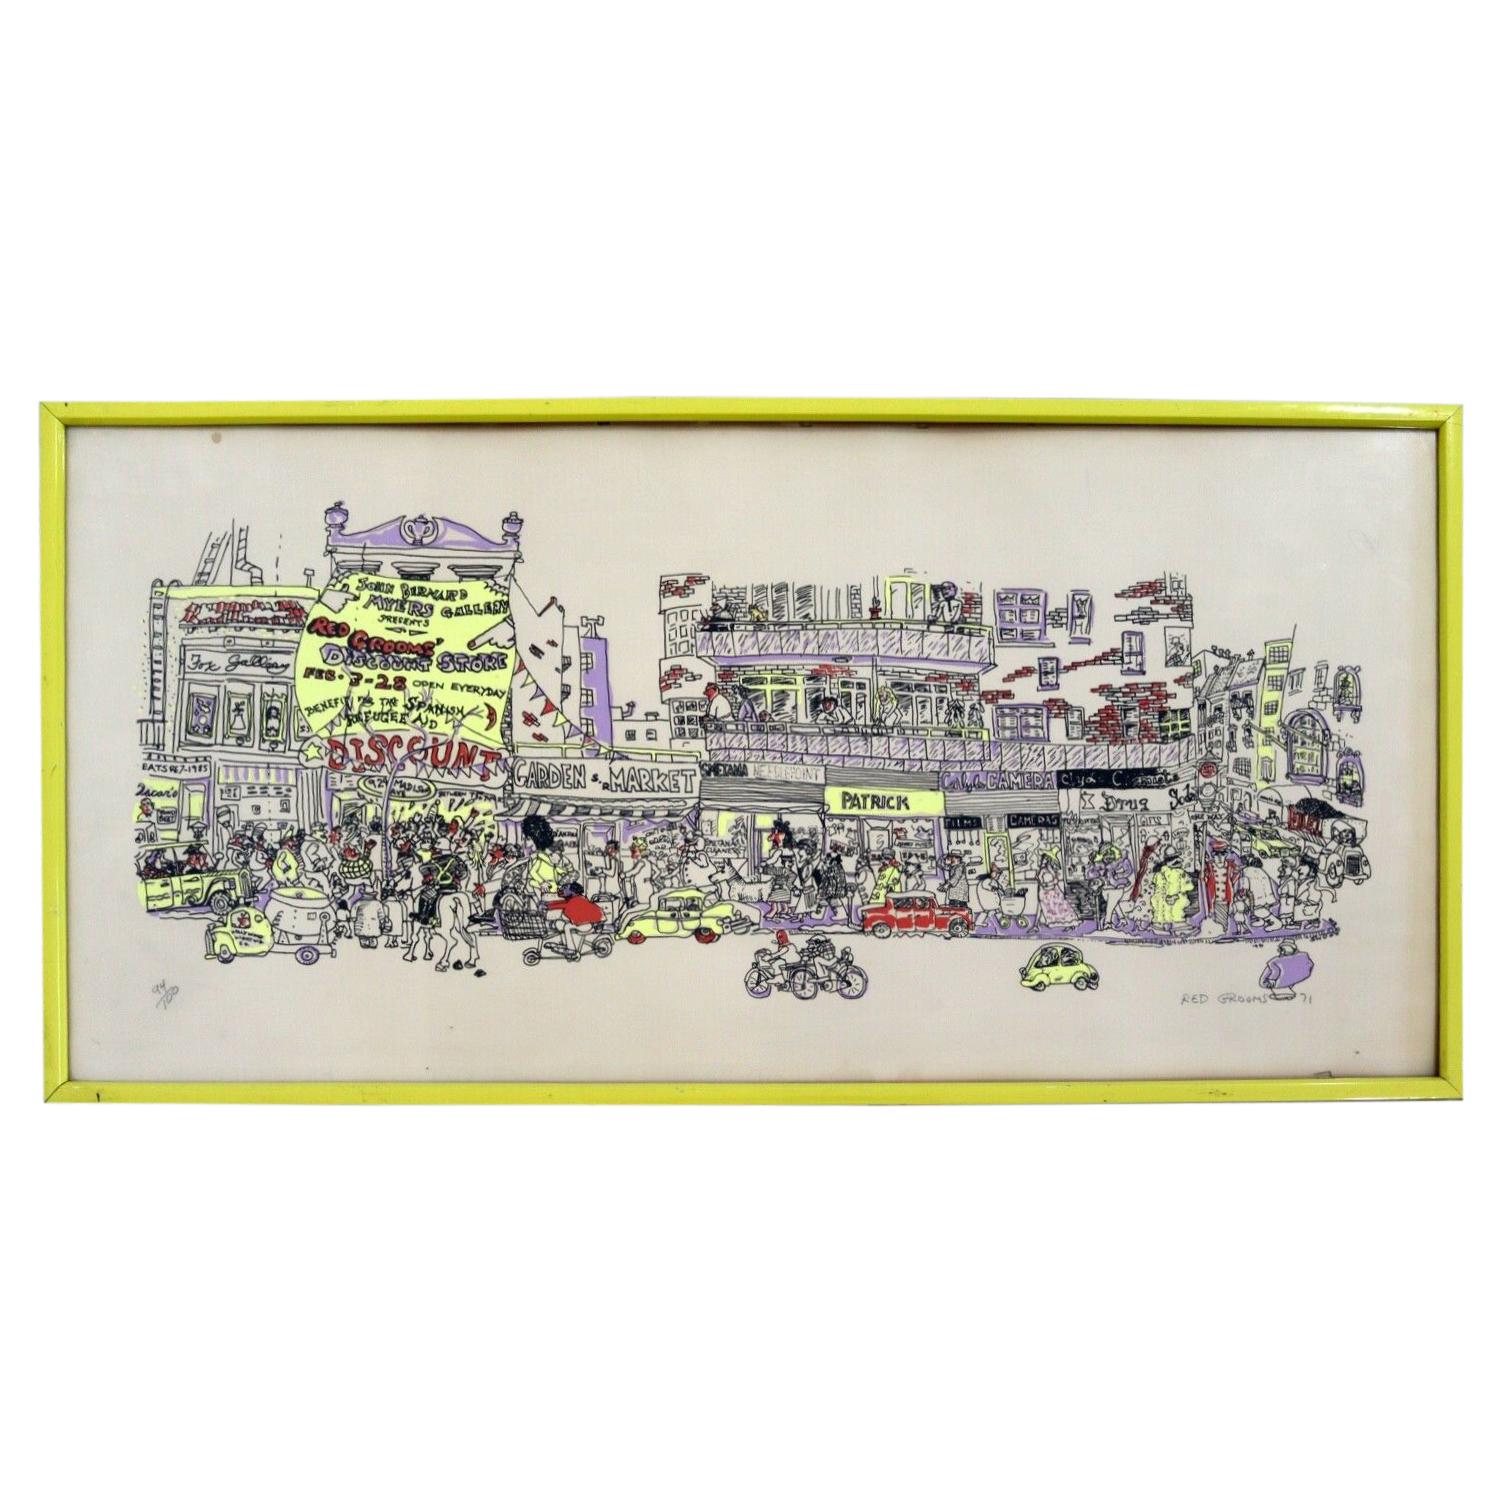 Red Grooms City Discount Store 1971 Screenprint Hand